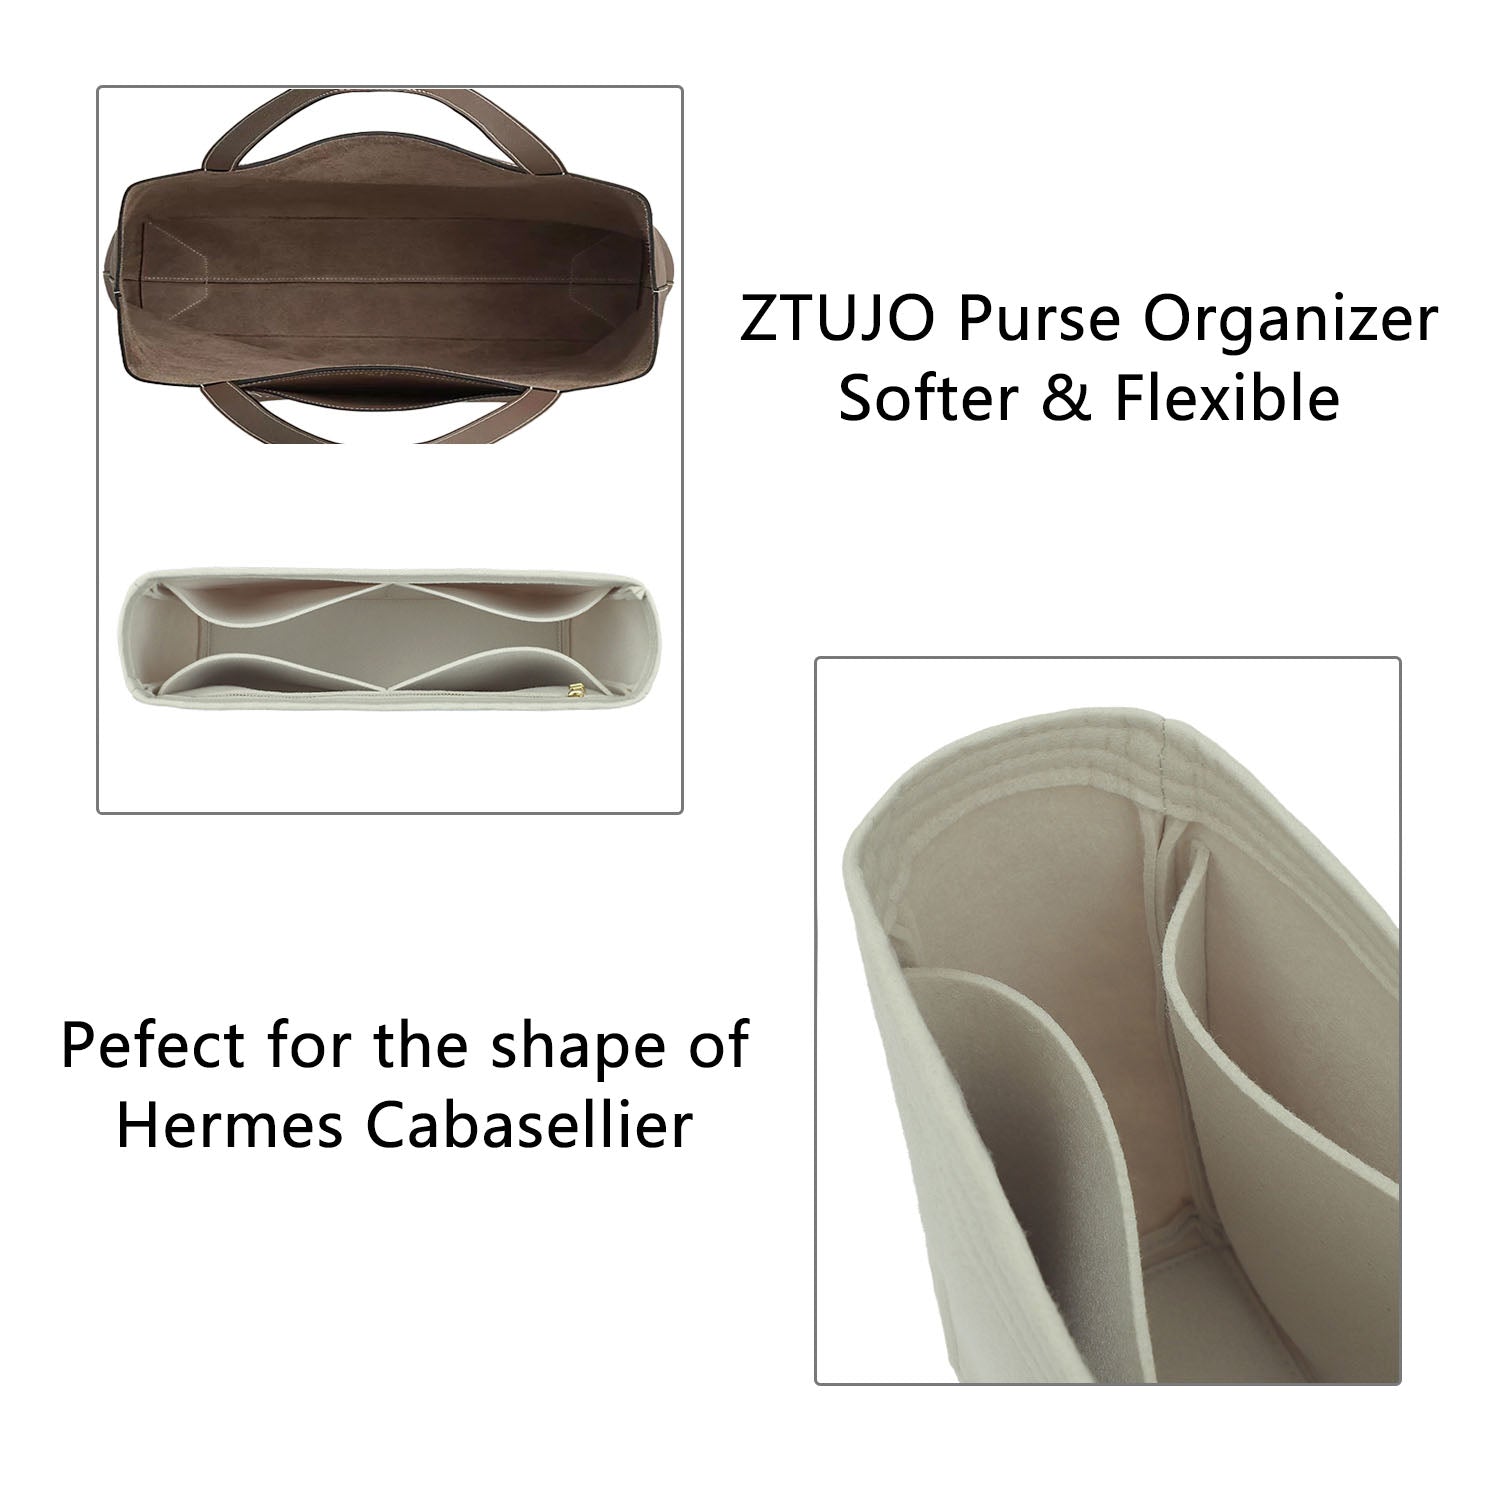 Premium High end version of Purse Organizer specially for Hermes Cabasellier 31 / 46